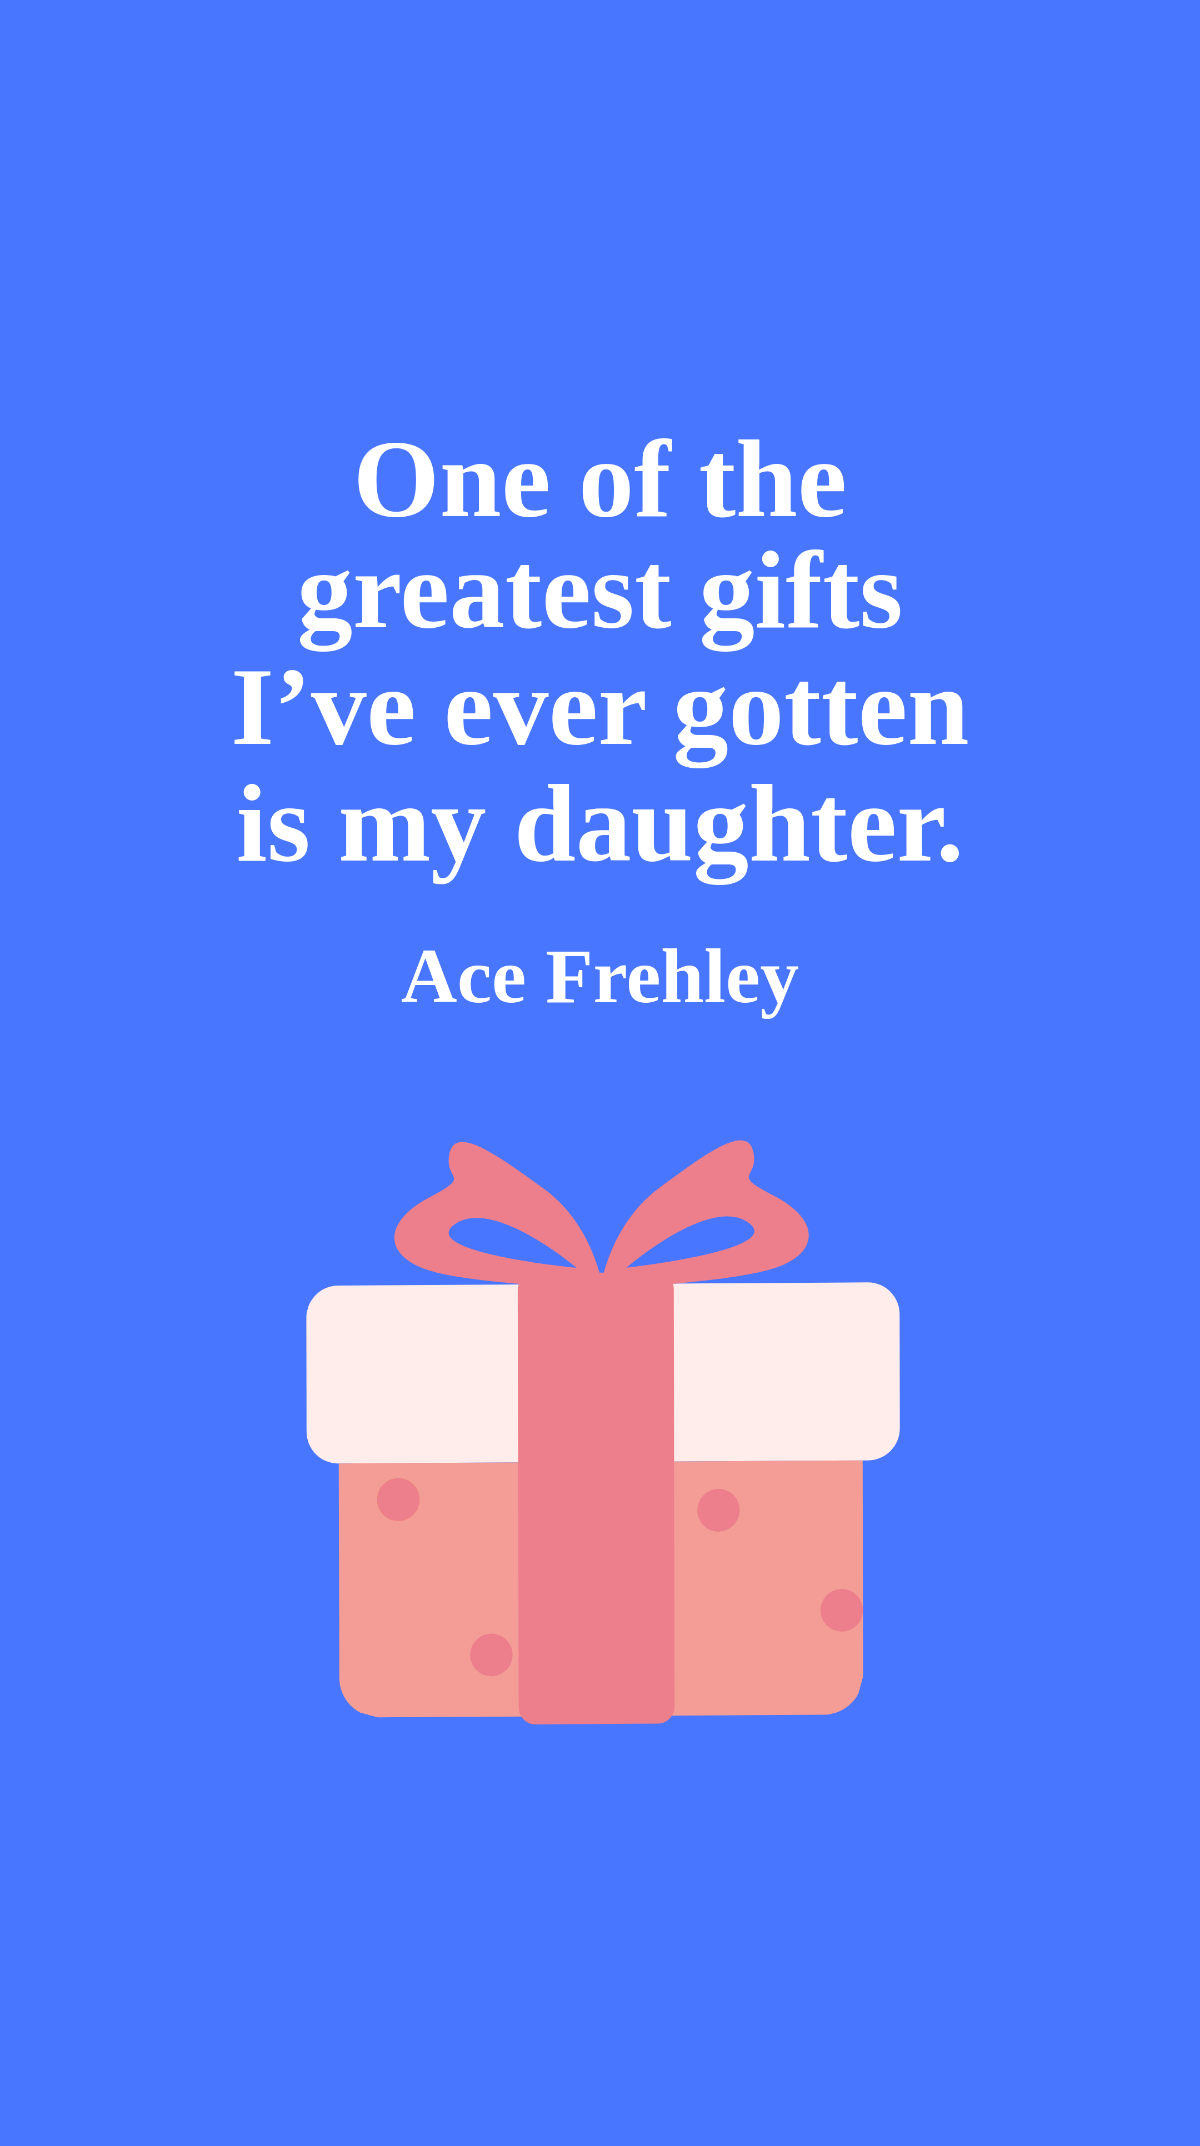 Ace Frehley - One of the greatest gifts I’ve ever gotten is my daughter. Template